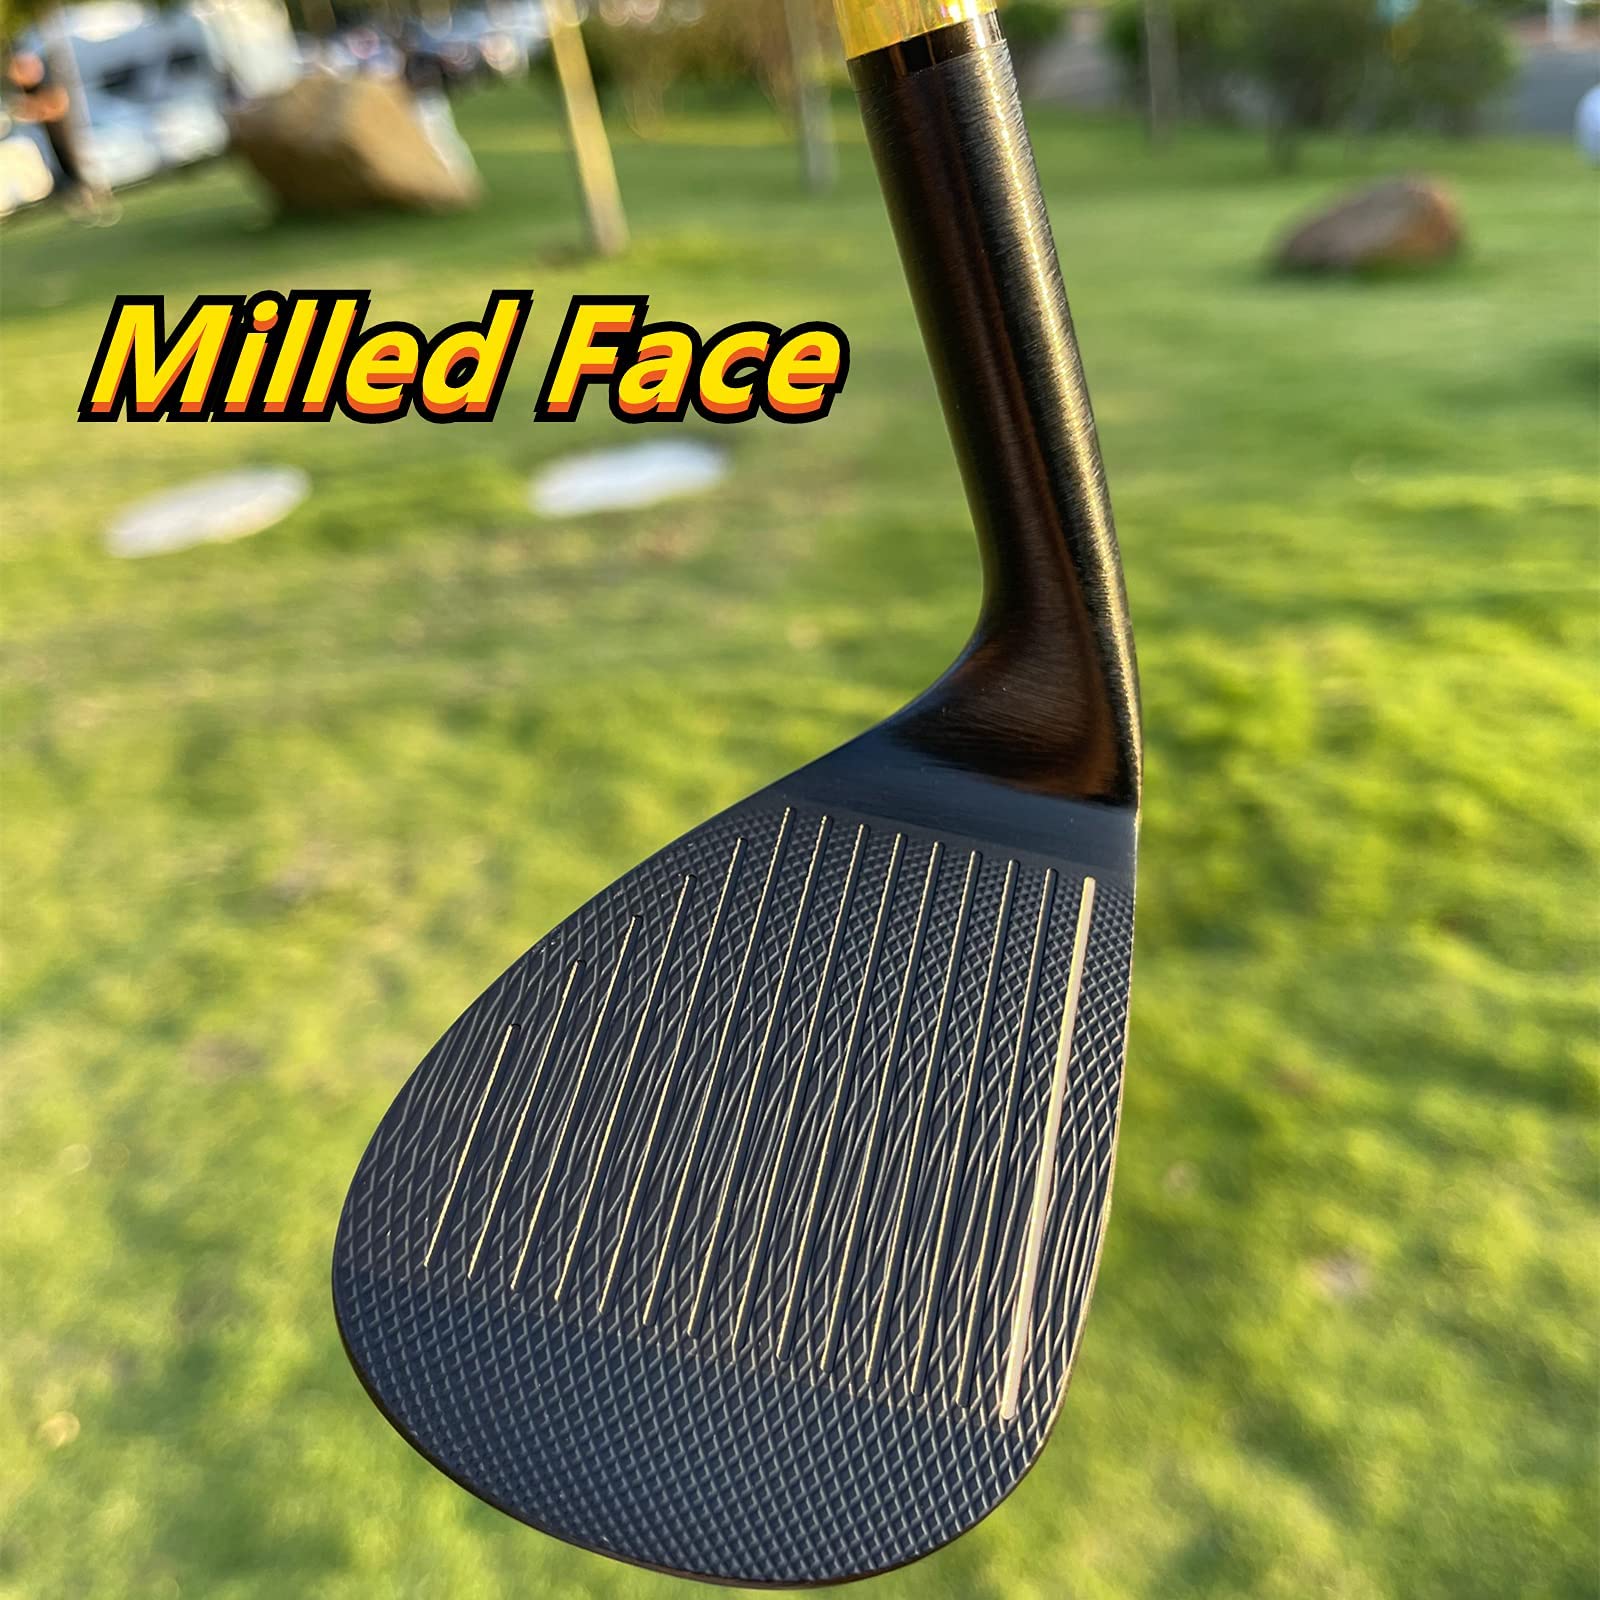 CALONG Forged Golf Wedge 52 56 60 64 68 72 Degree Right Hand Sand Wedge Milled Face Lob Wedge for Men & Women-High Loft Golf Club